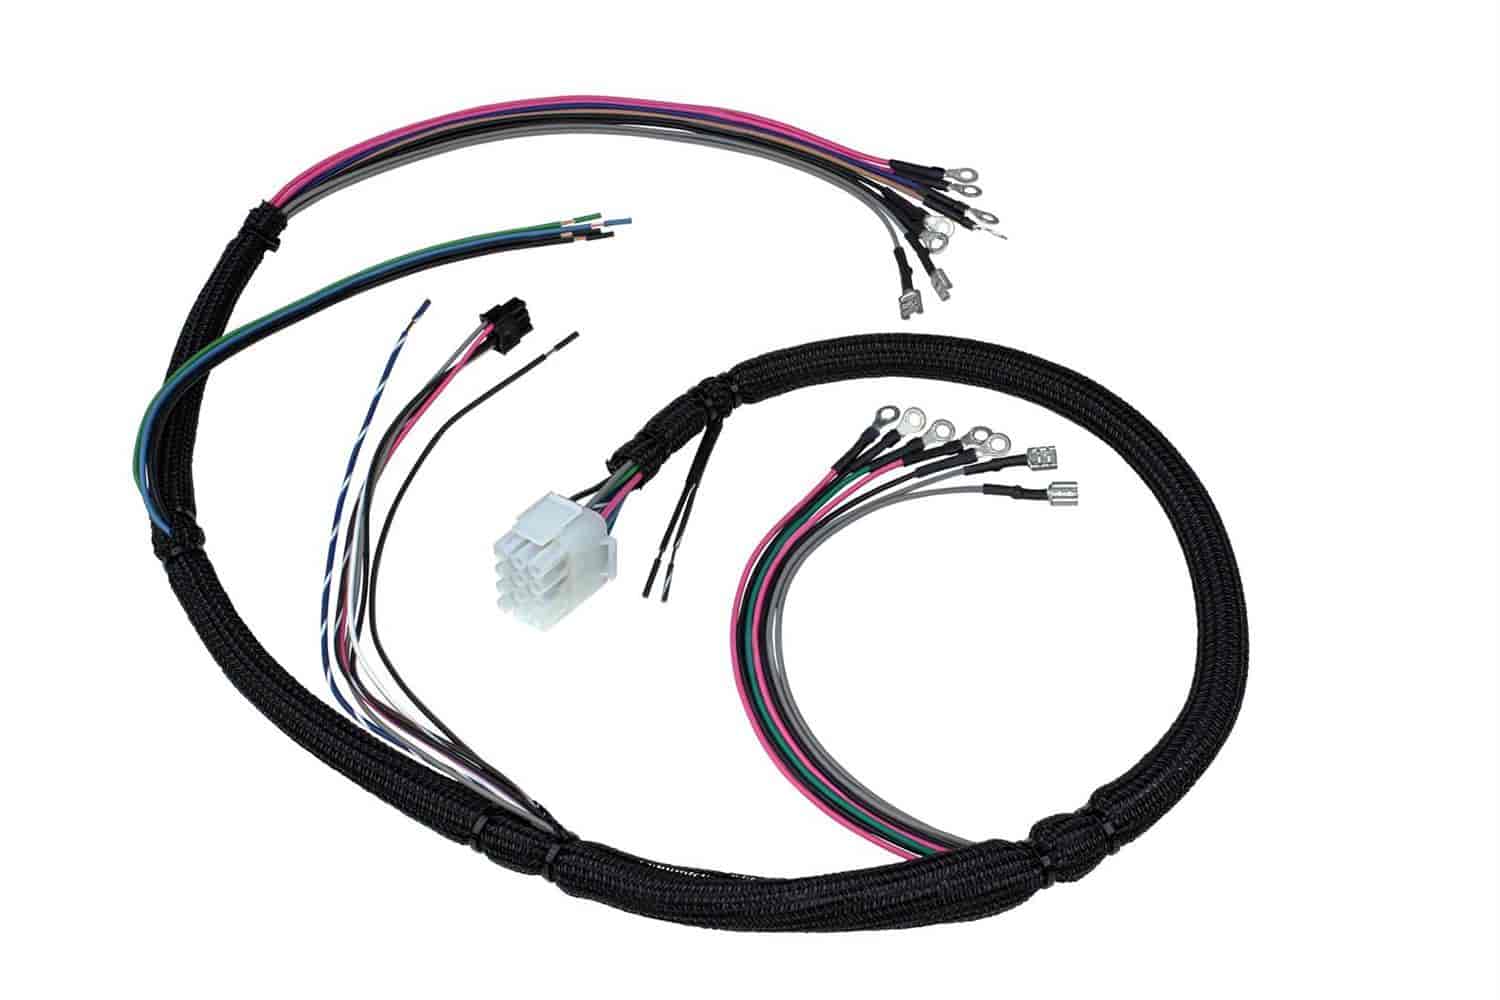 6-Gauge Wiring Harness Includes: Quick Disconnect Connections